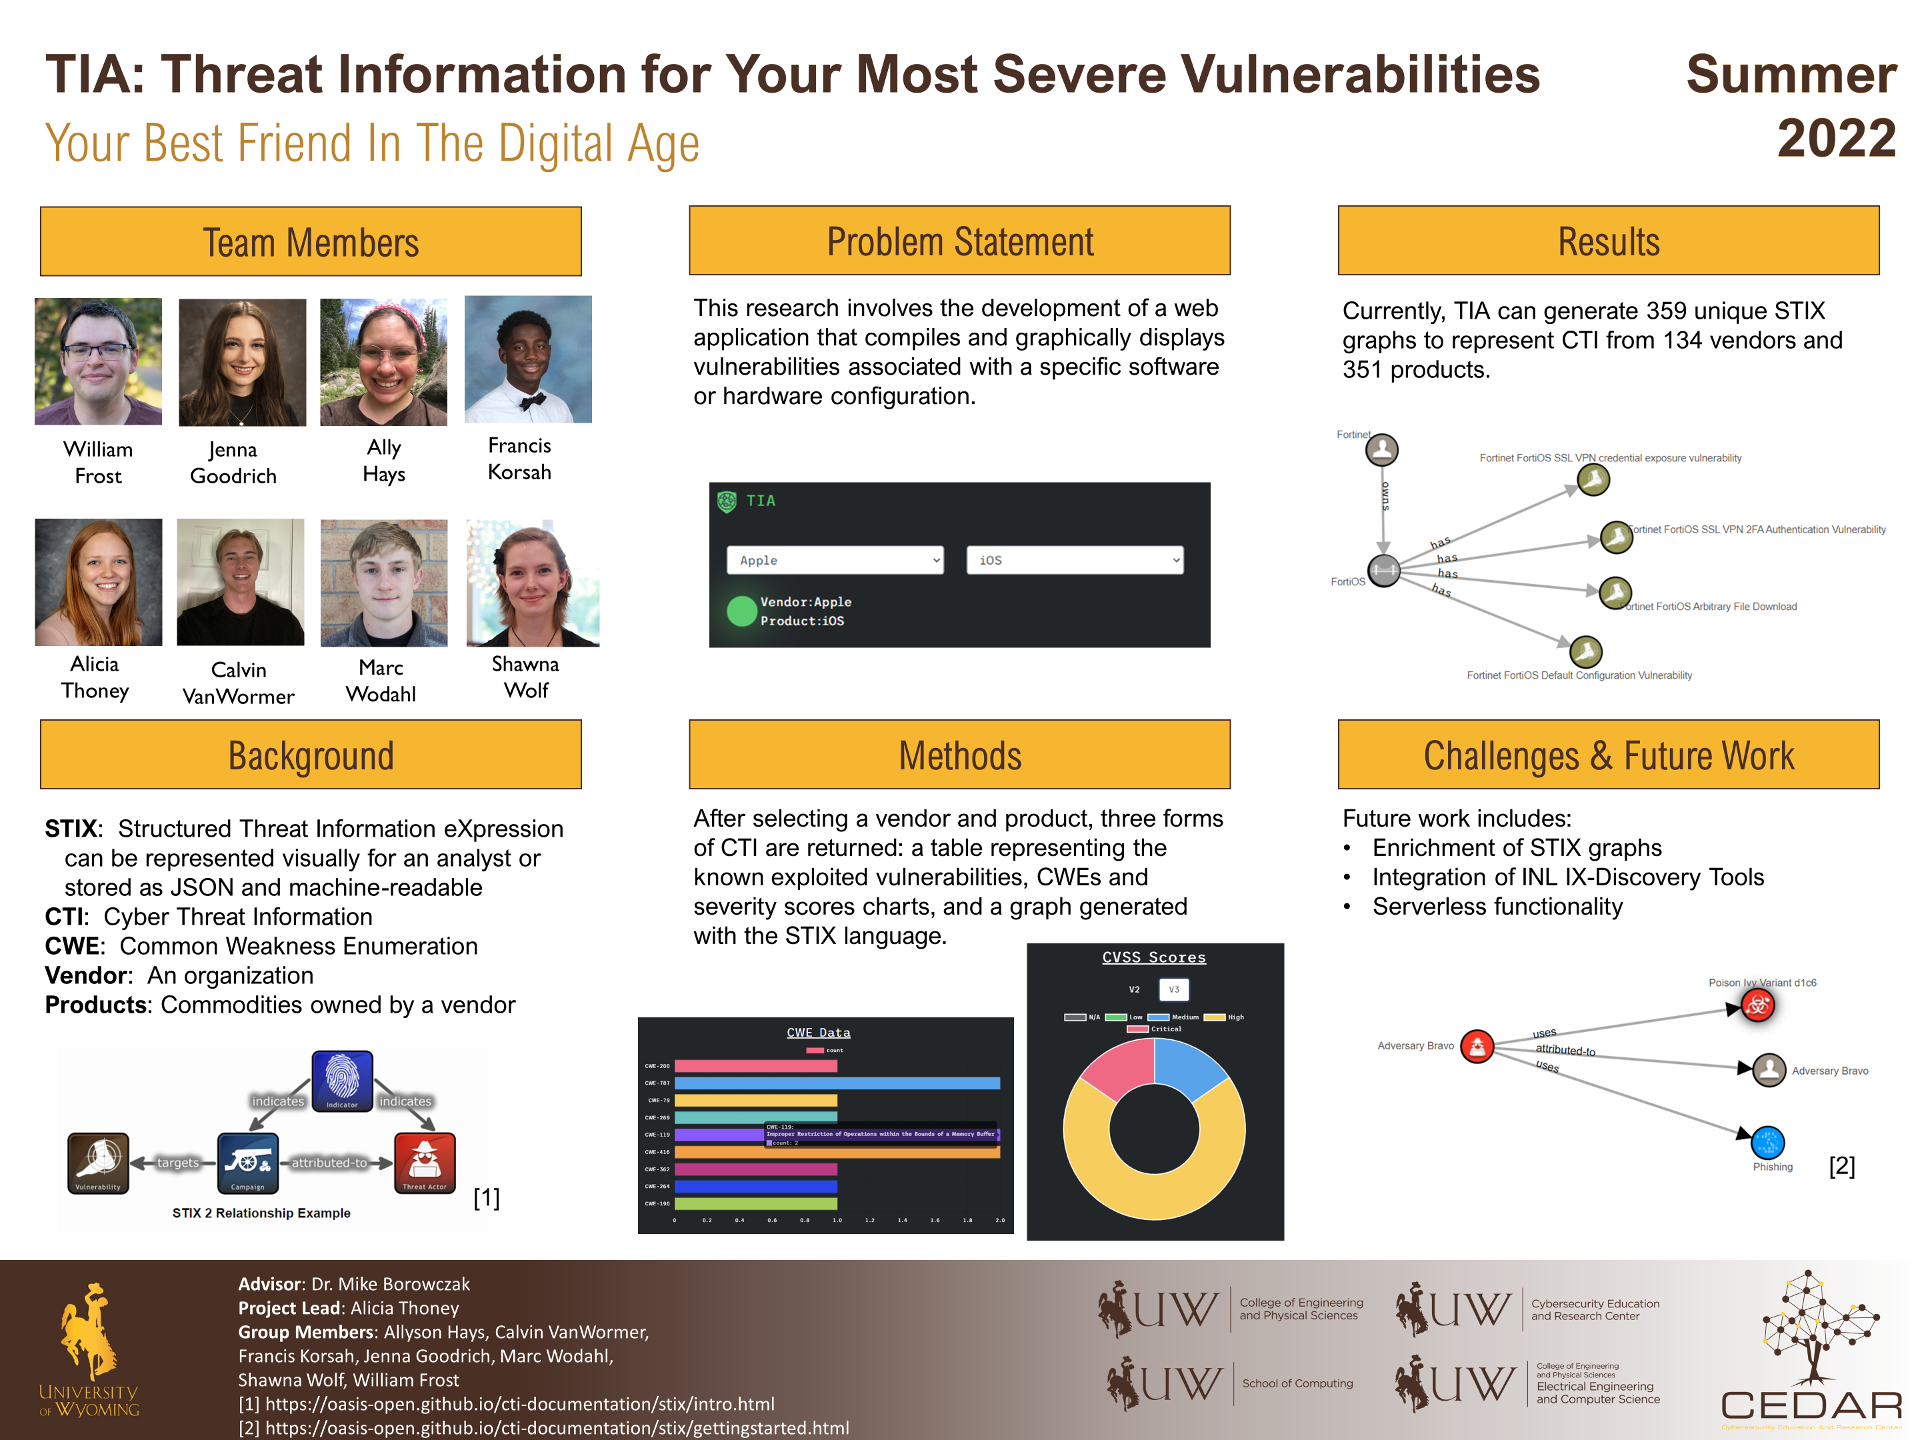  Poster for TIA: Threat Information for your Most Severe Vulnerabilities